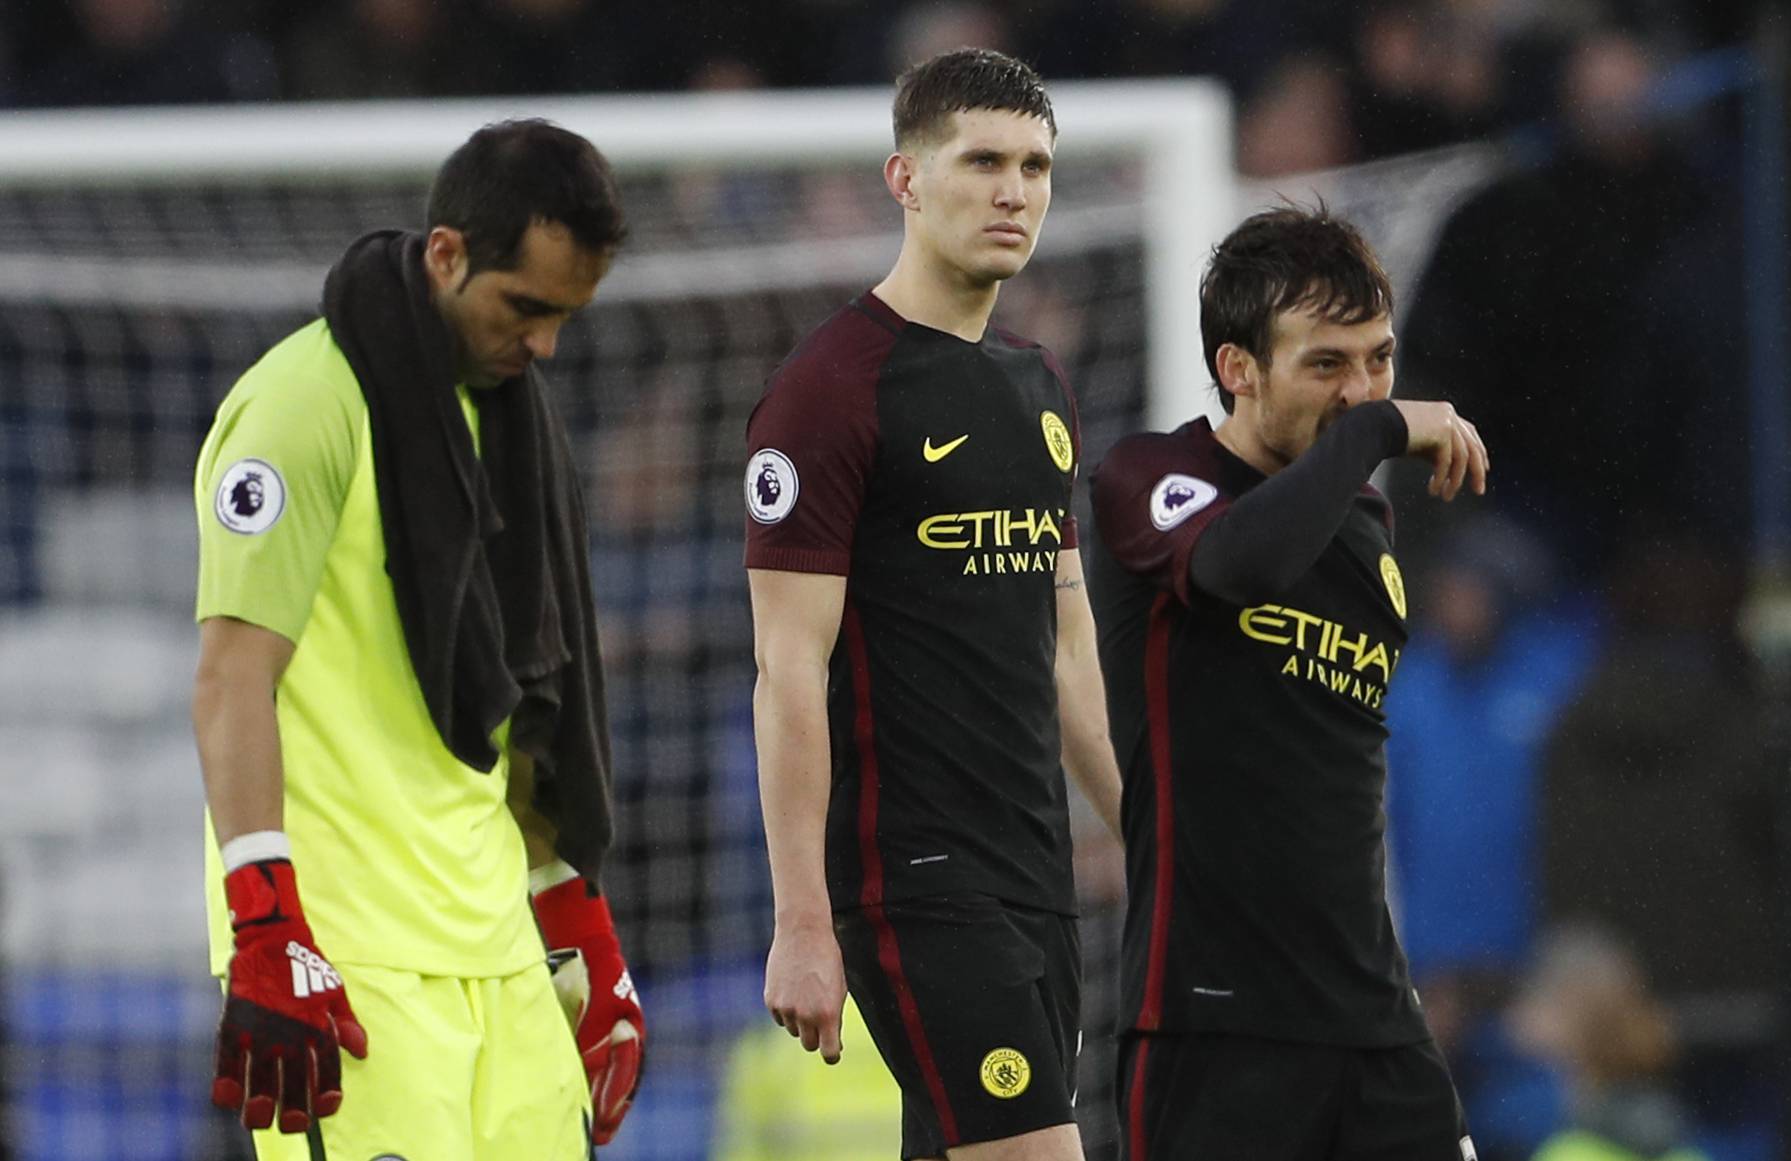 Manchester City's Claudio Bravo, John Stones and David Silva look dejected after the game